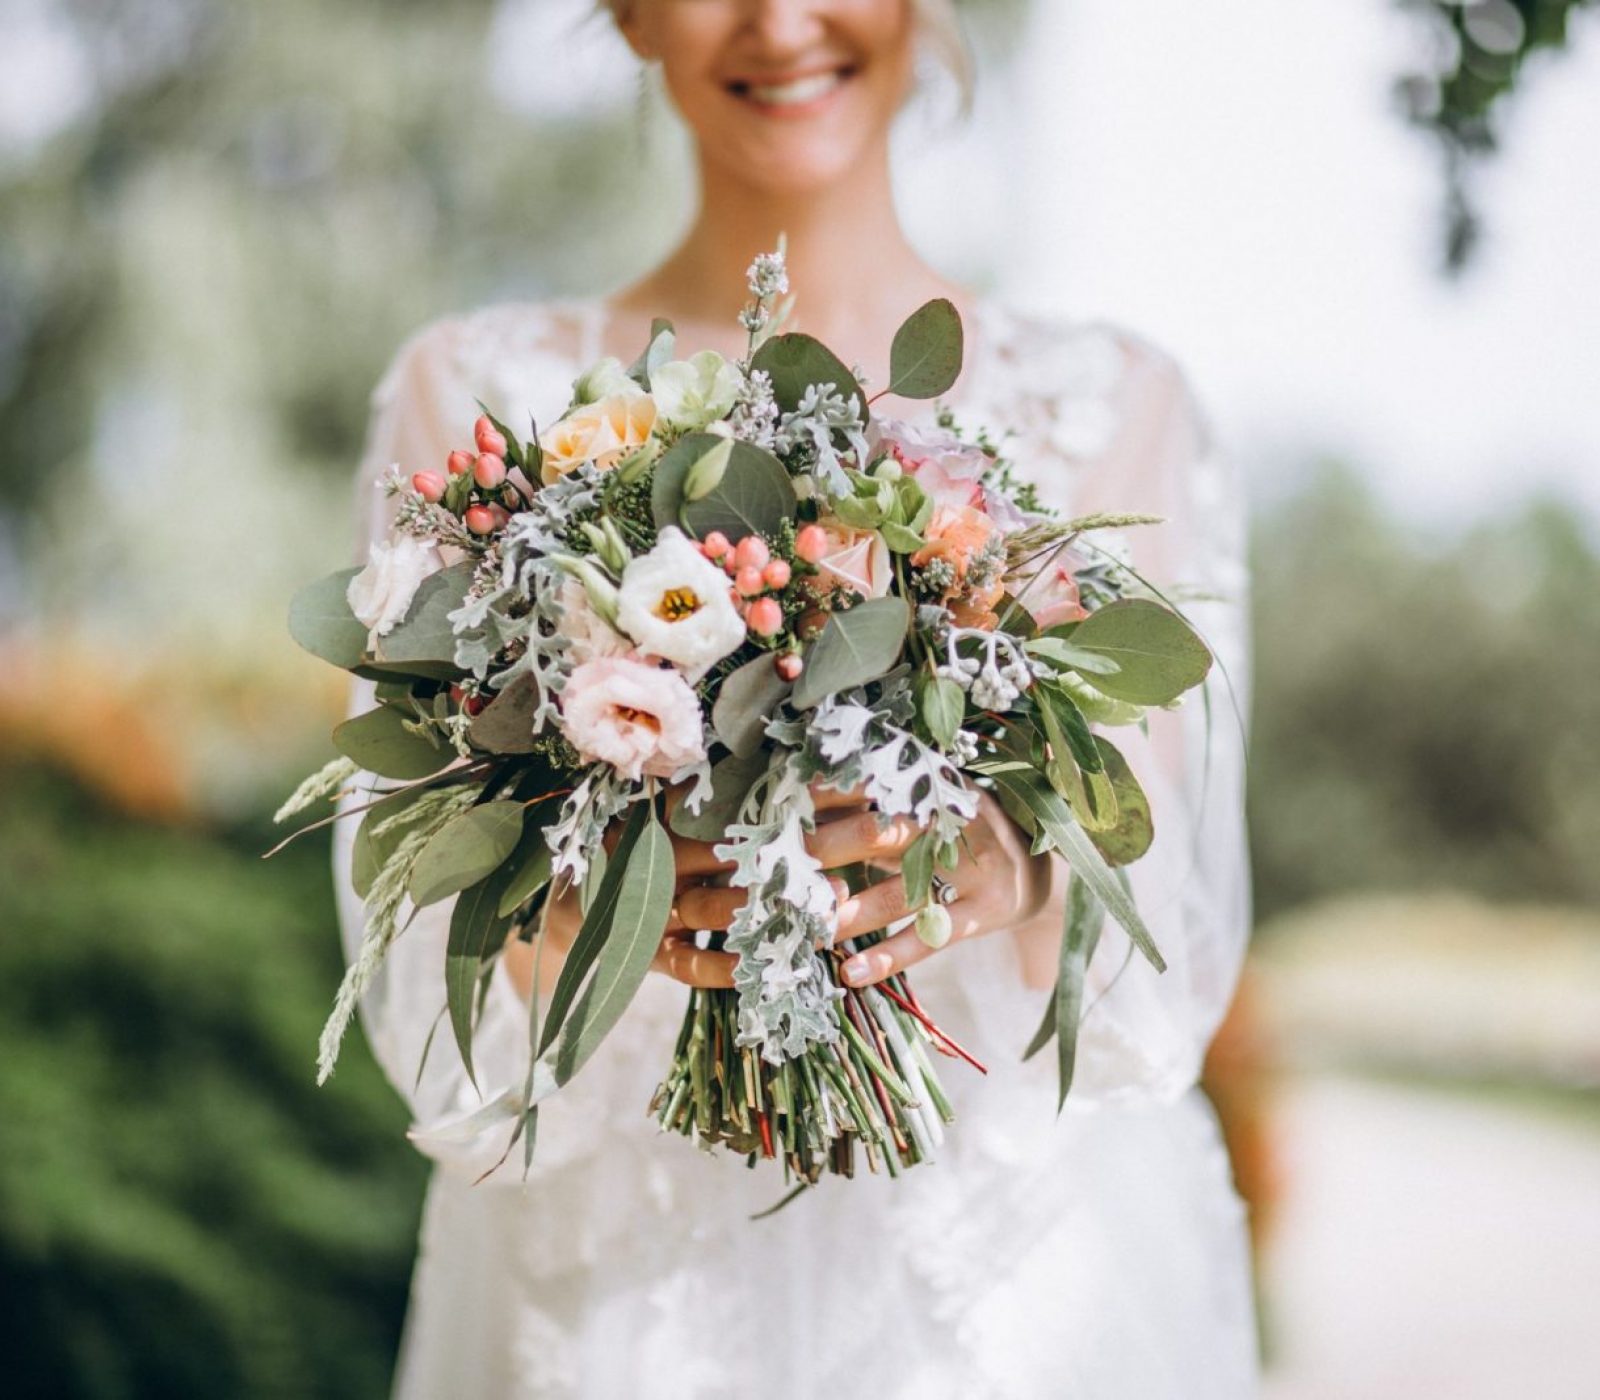 Bride holding her bouquet on her wedding day